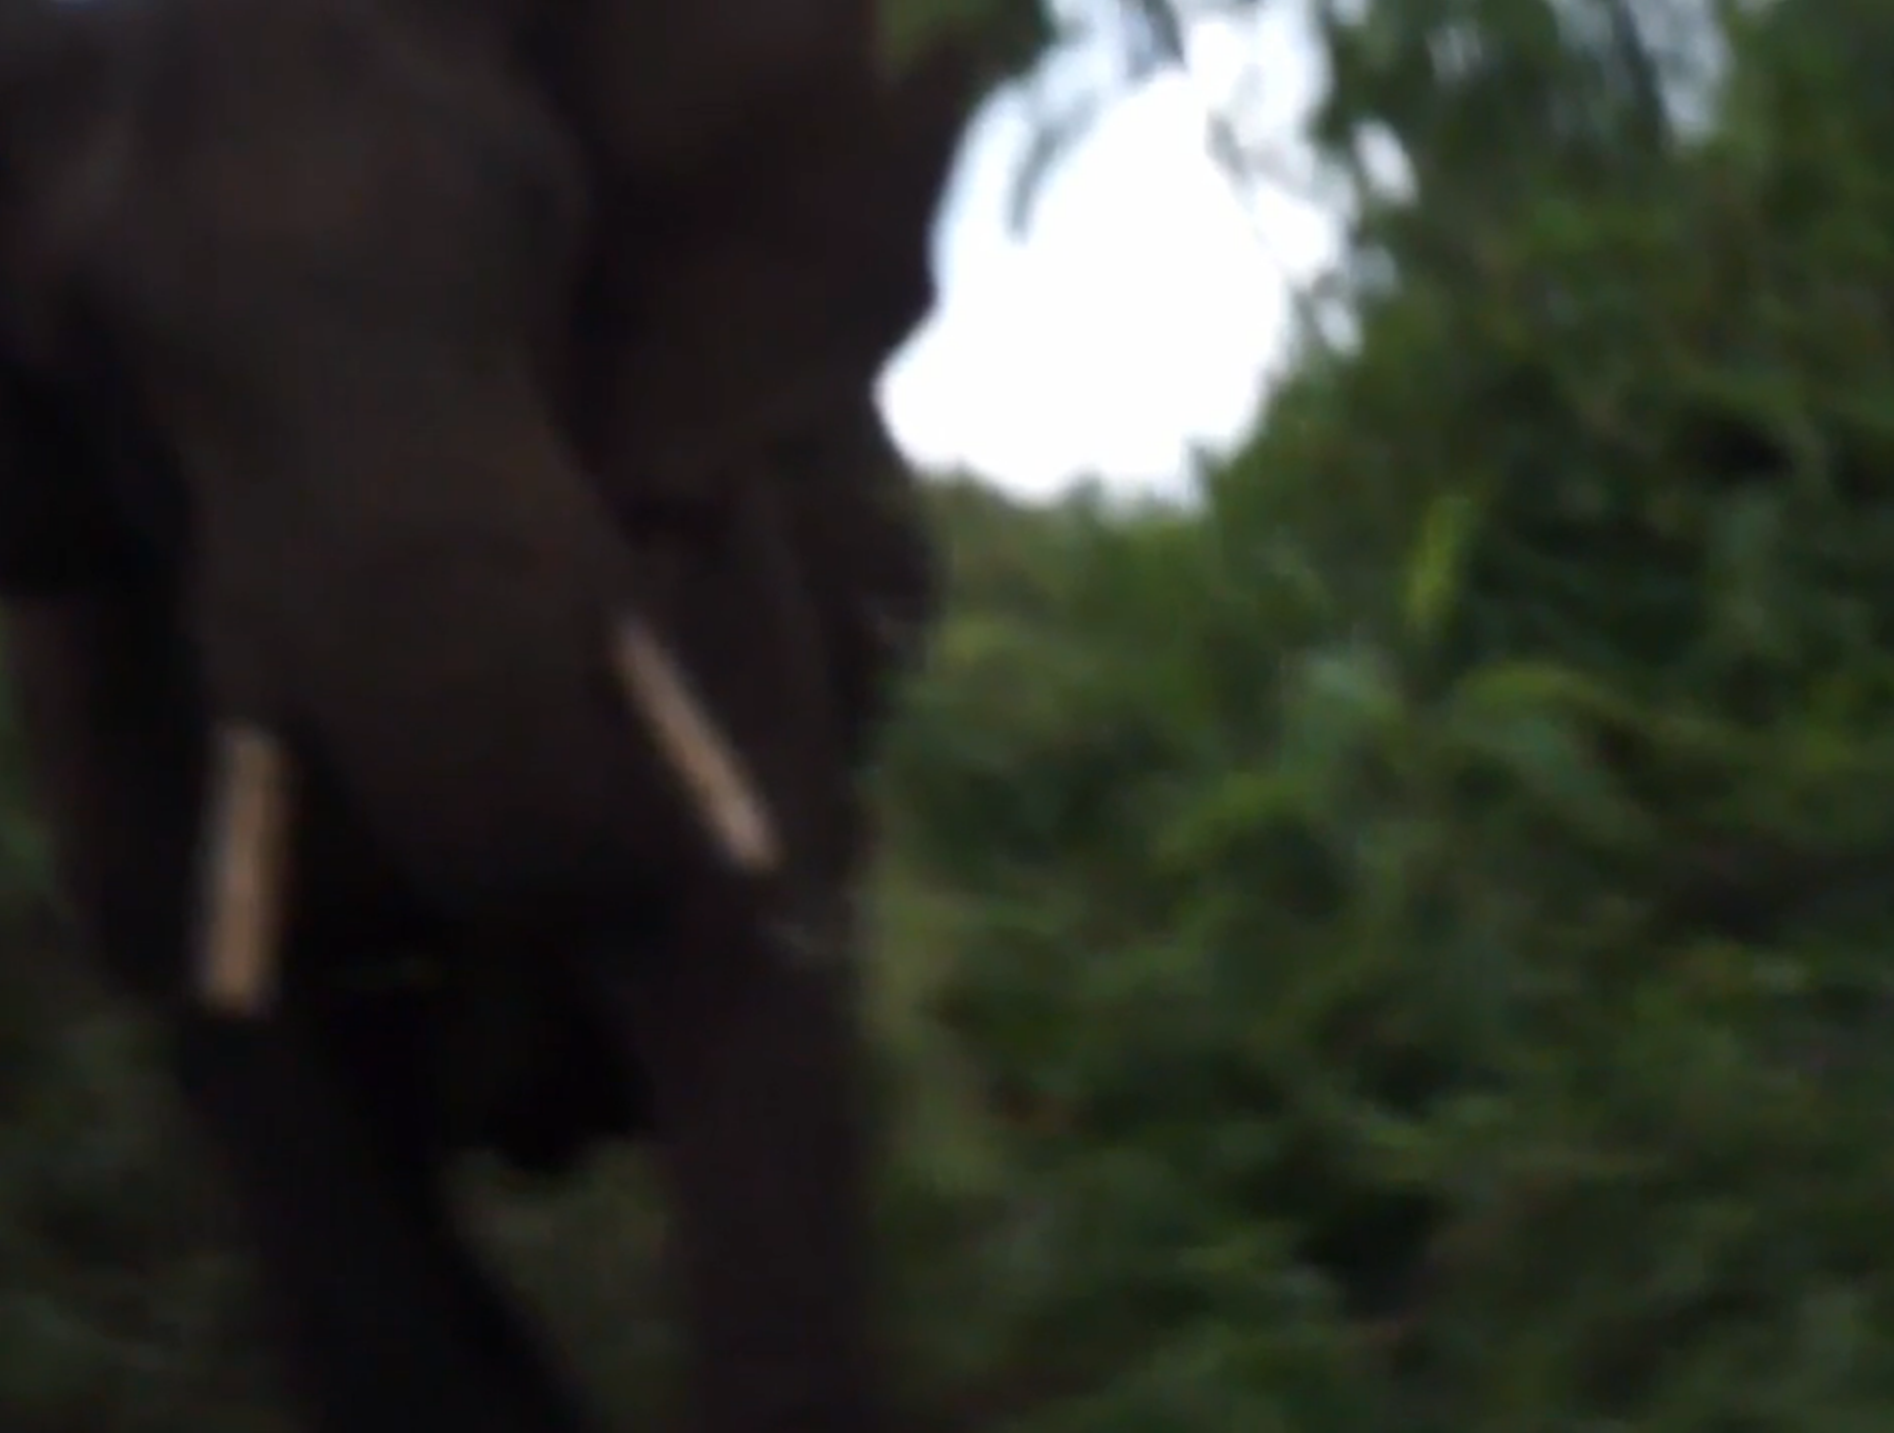 The moment the elephant charged